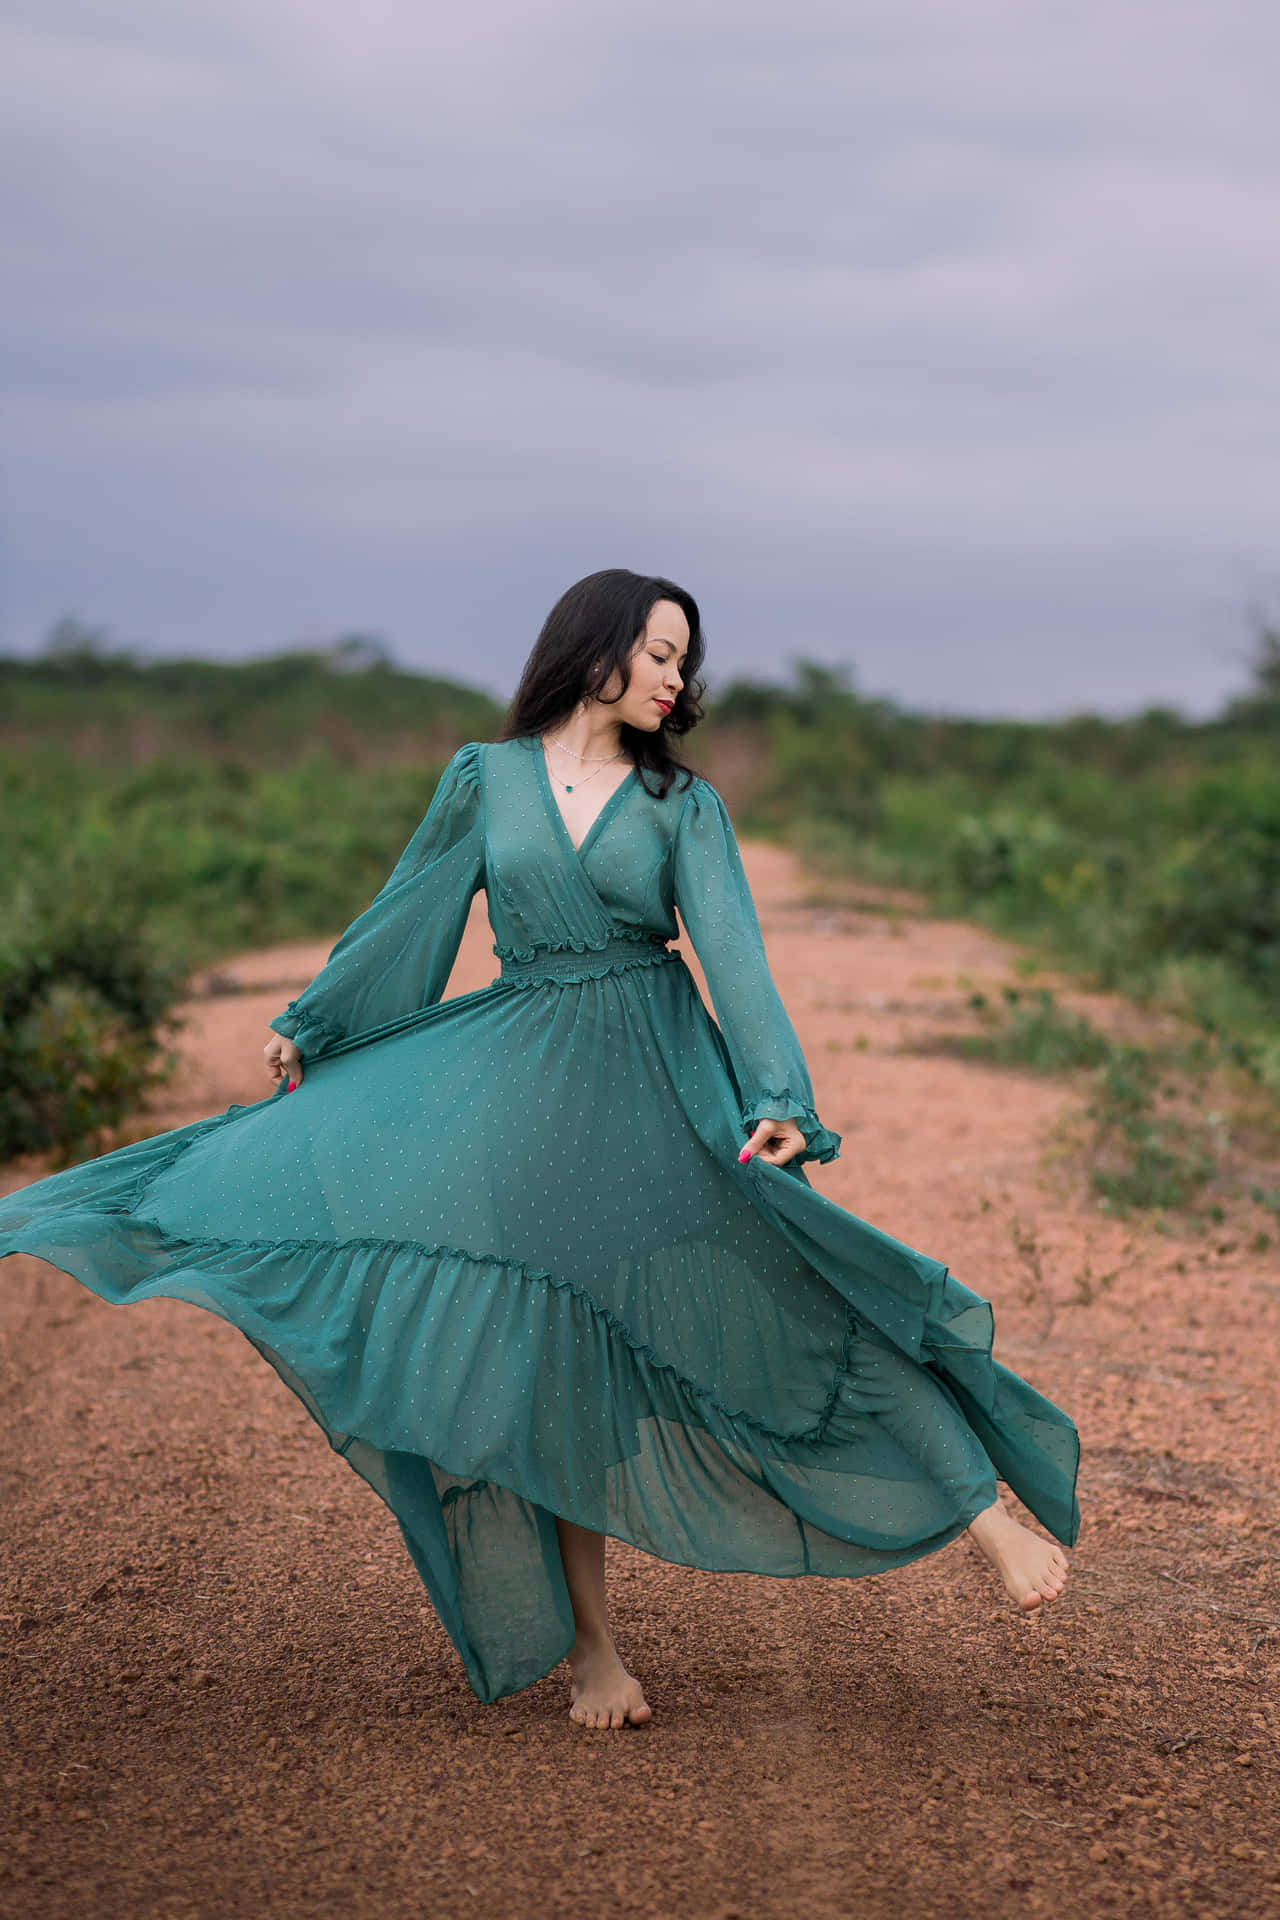 A Woman In A Green Dress Is Dancing On A Dirt Road